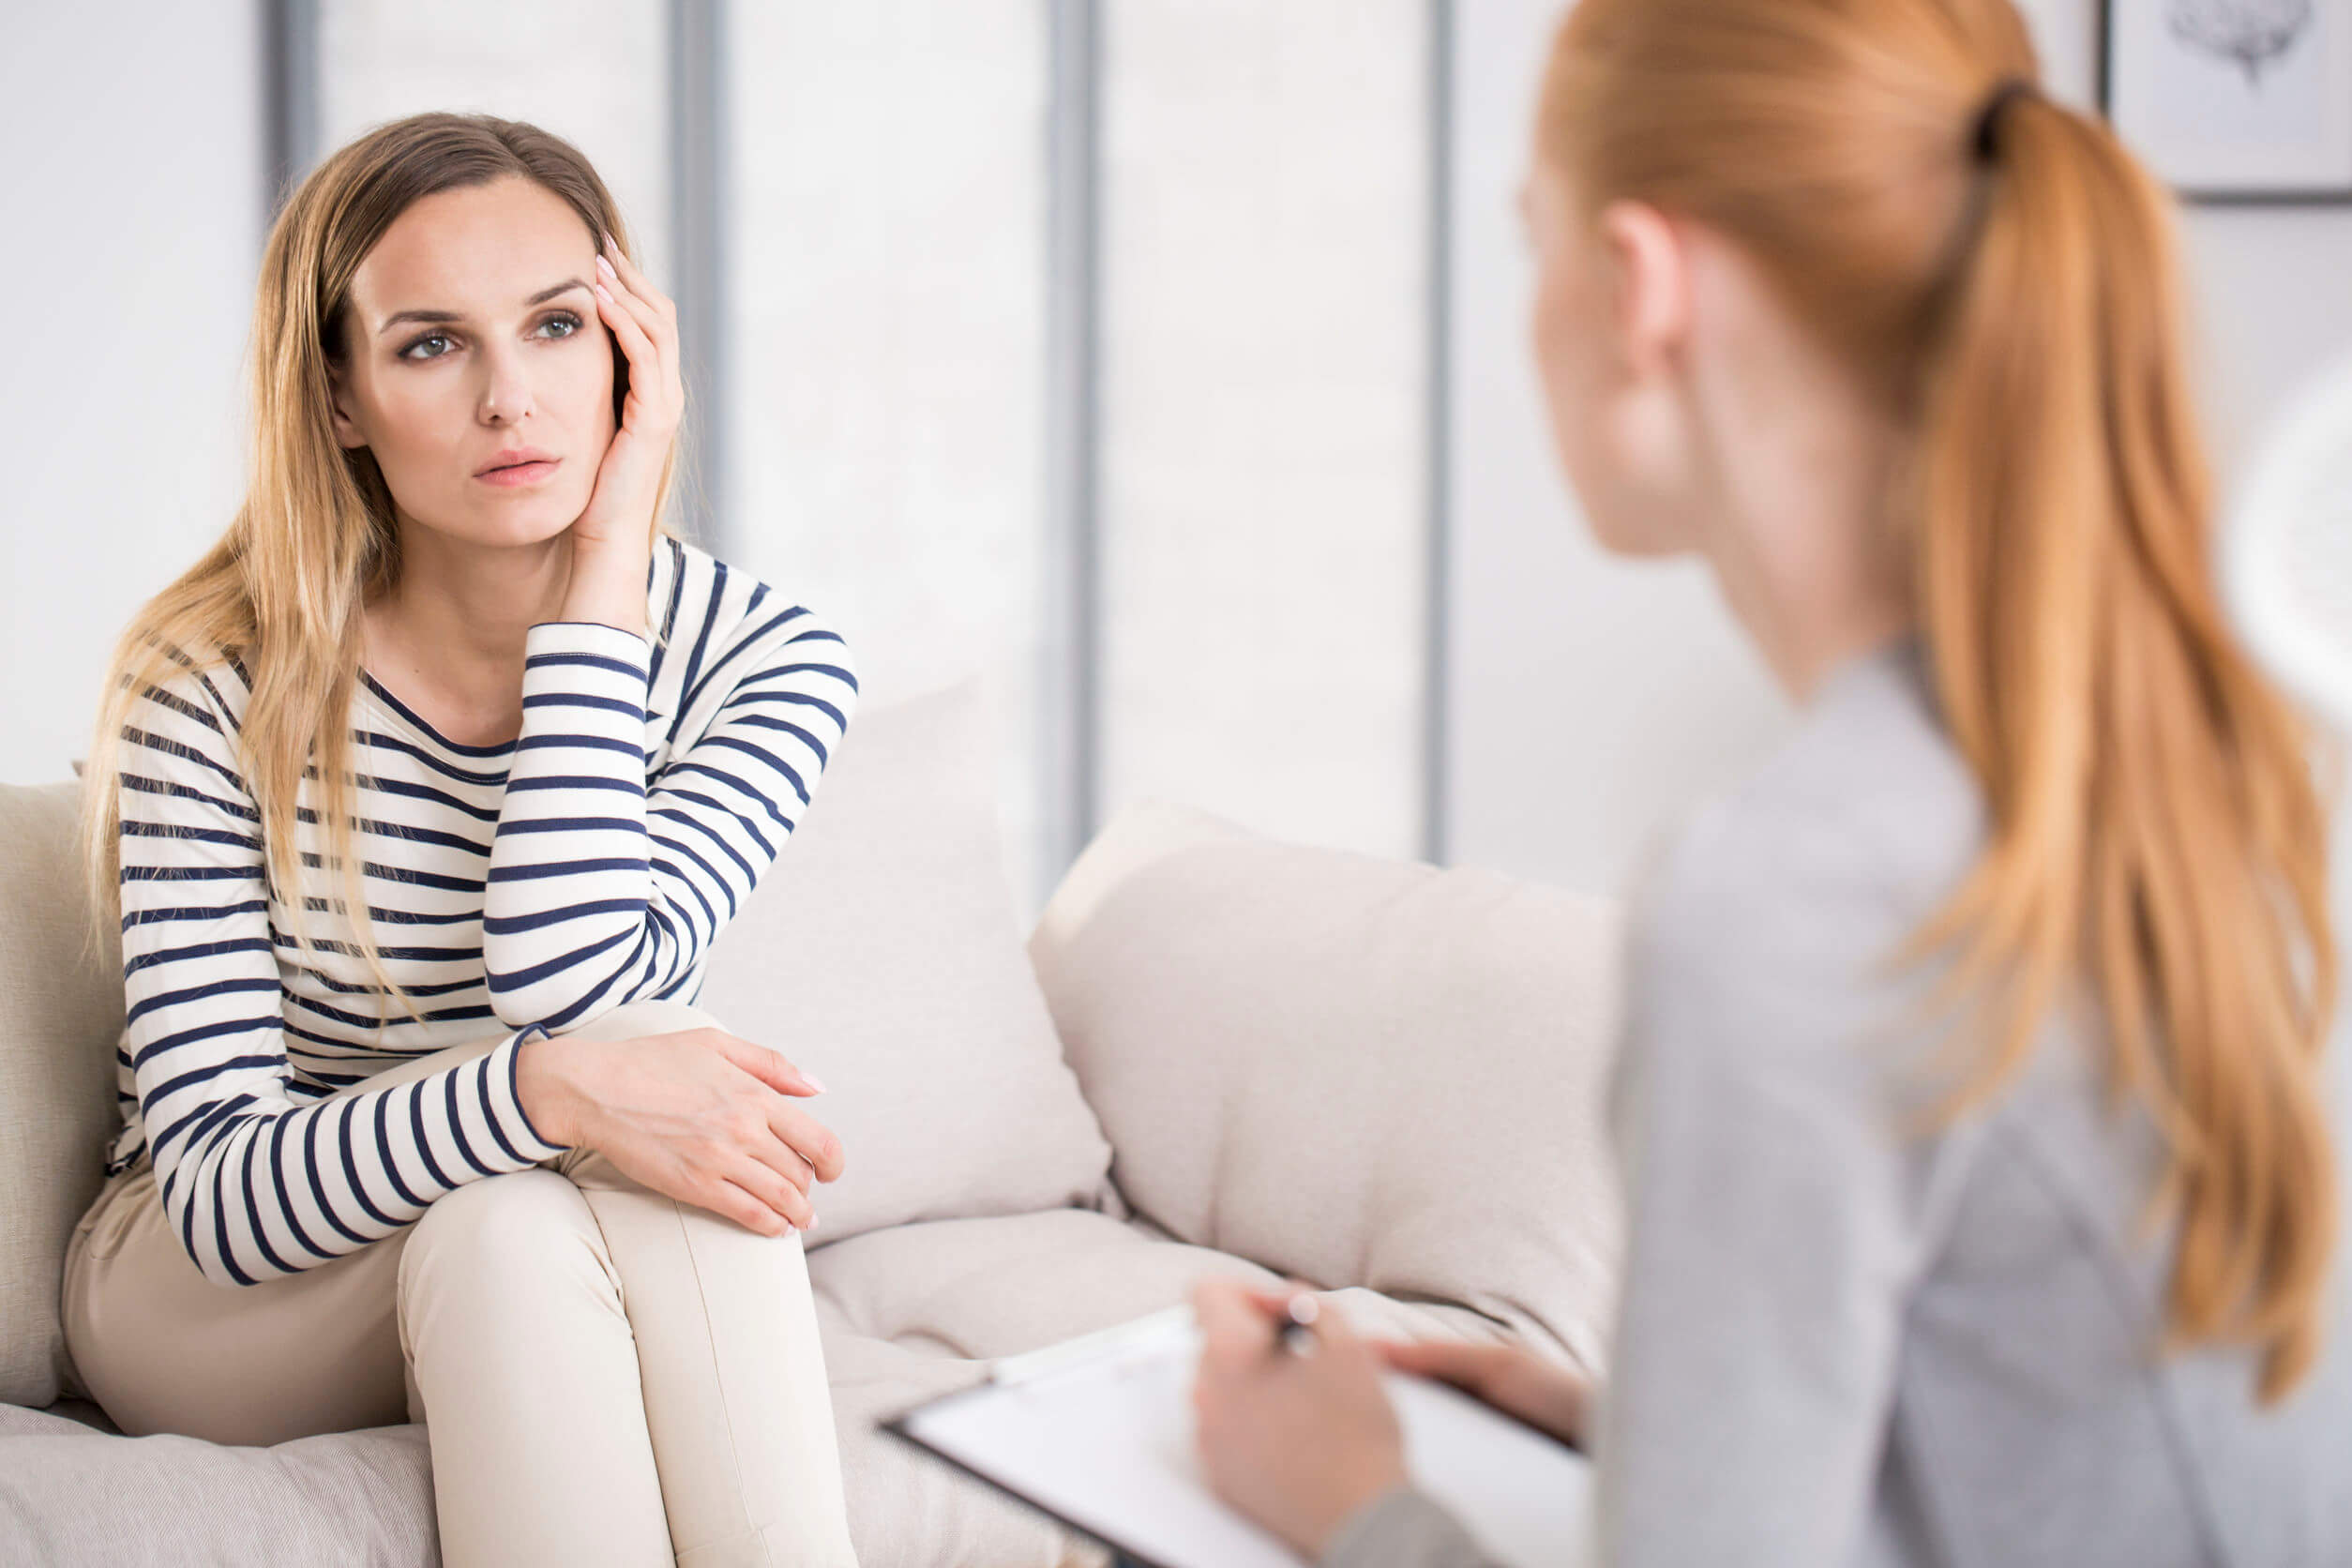 Living with endometriosis may require mental therapy